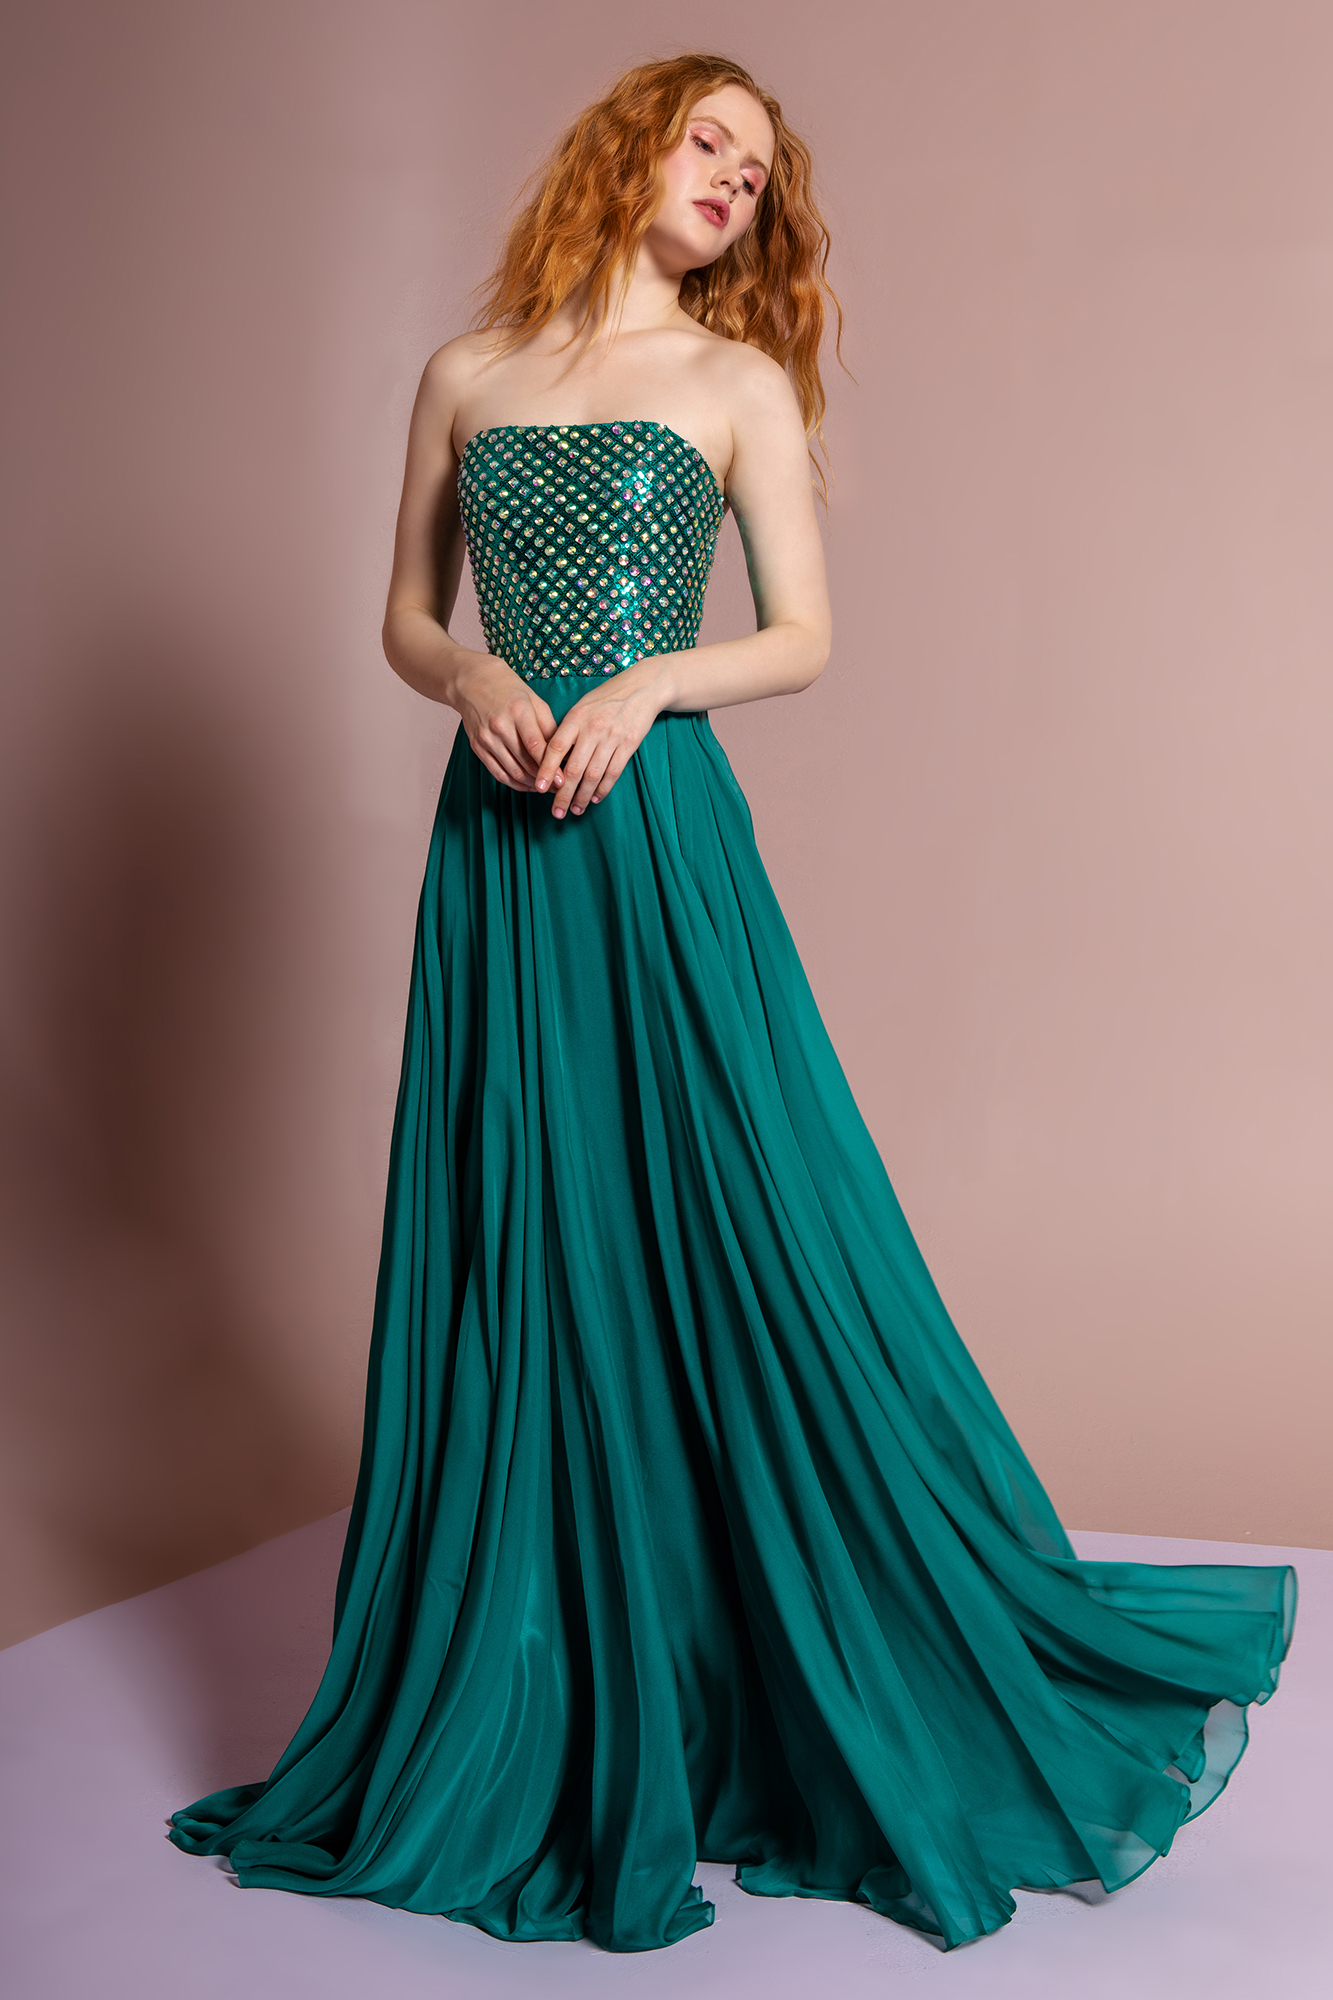 woman in green strapless gown